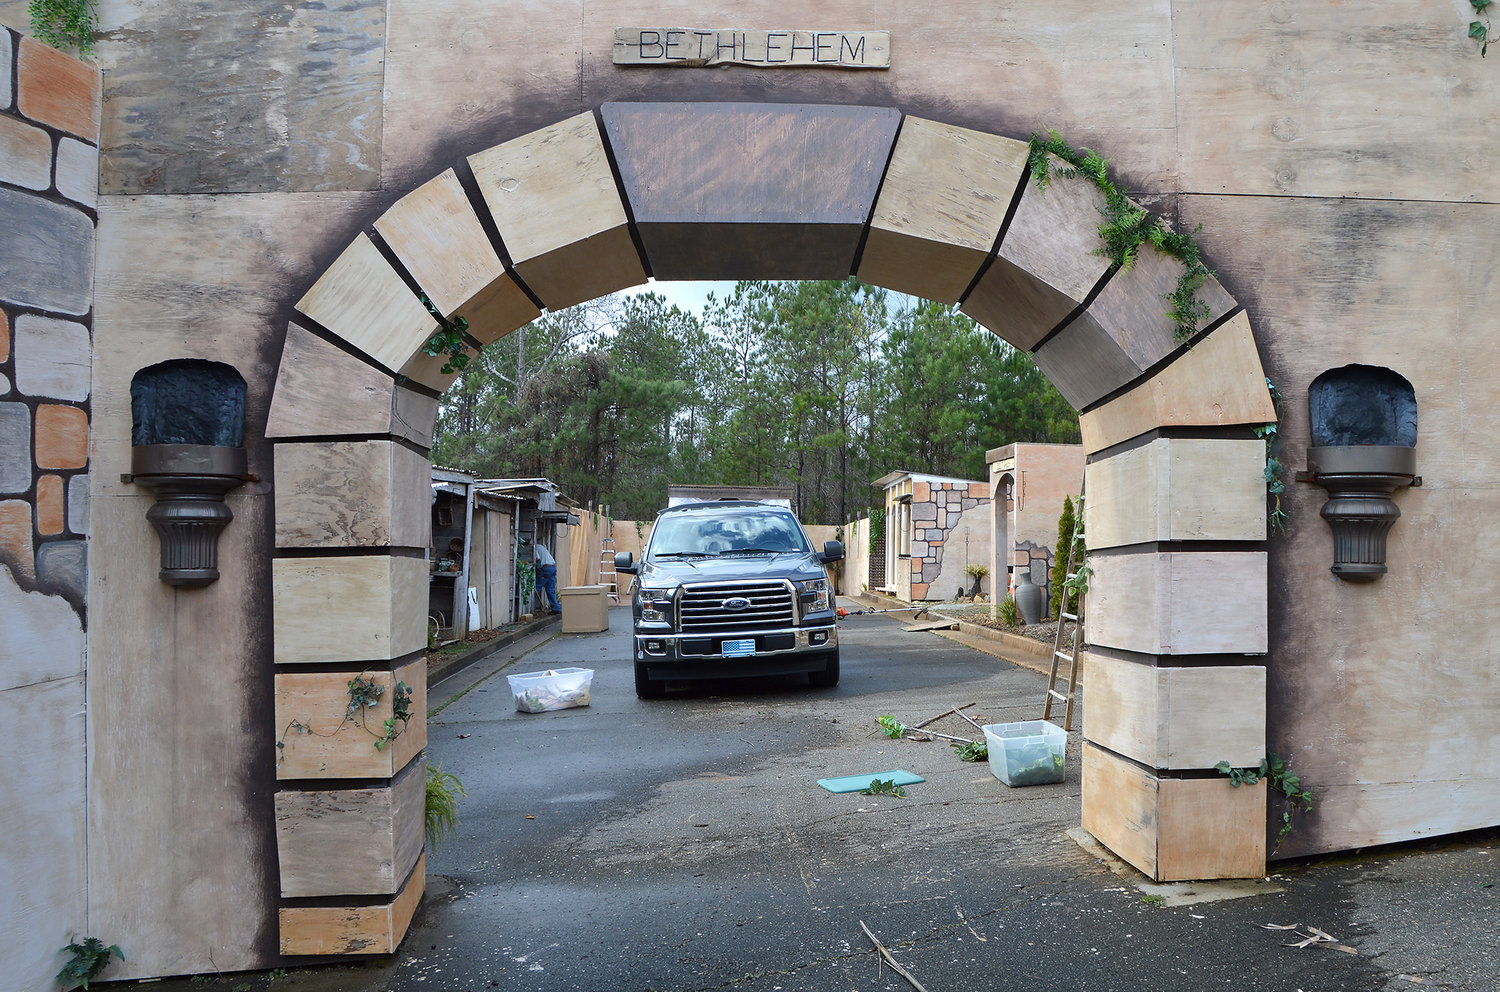 A truck is parked beyond the gate of the Bethlehem village set on the grounds of Legacy Baptist Church in Dallas, Ga., Thursday, Dec. 8, 2022, as final preparations are made for the Legacy of Bethlehem production. (Index/Henry Durand)